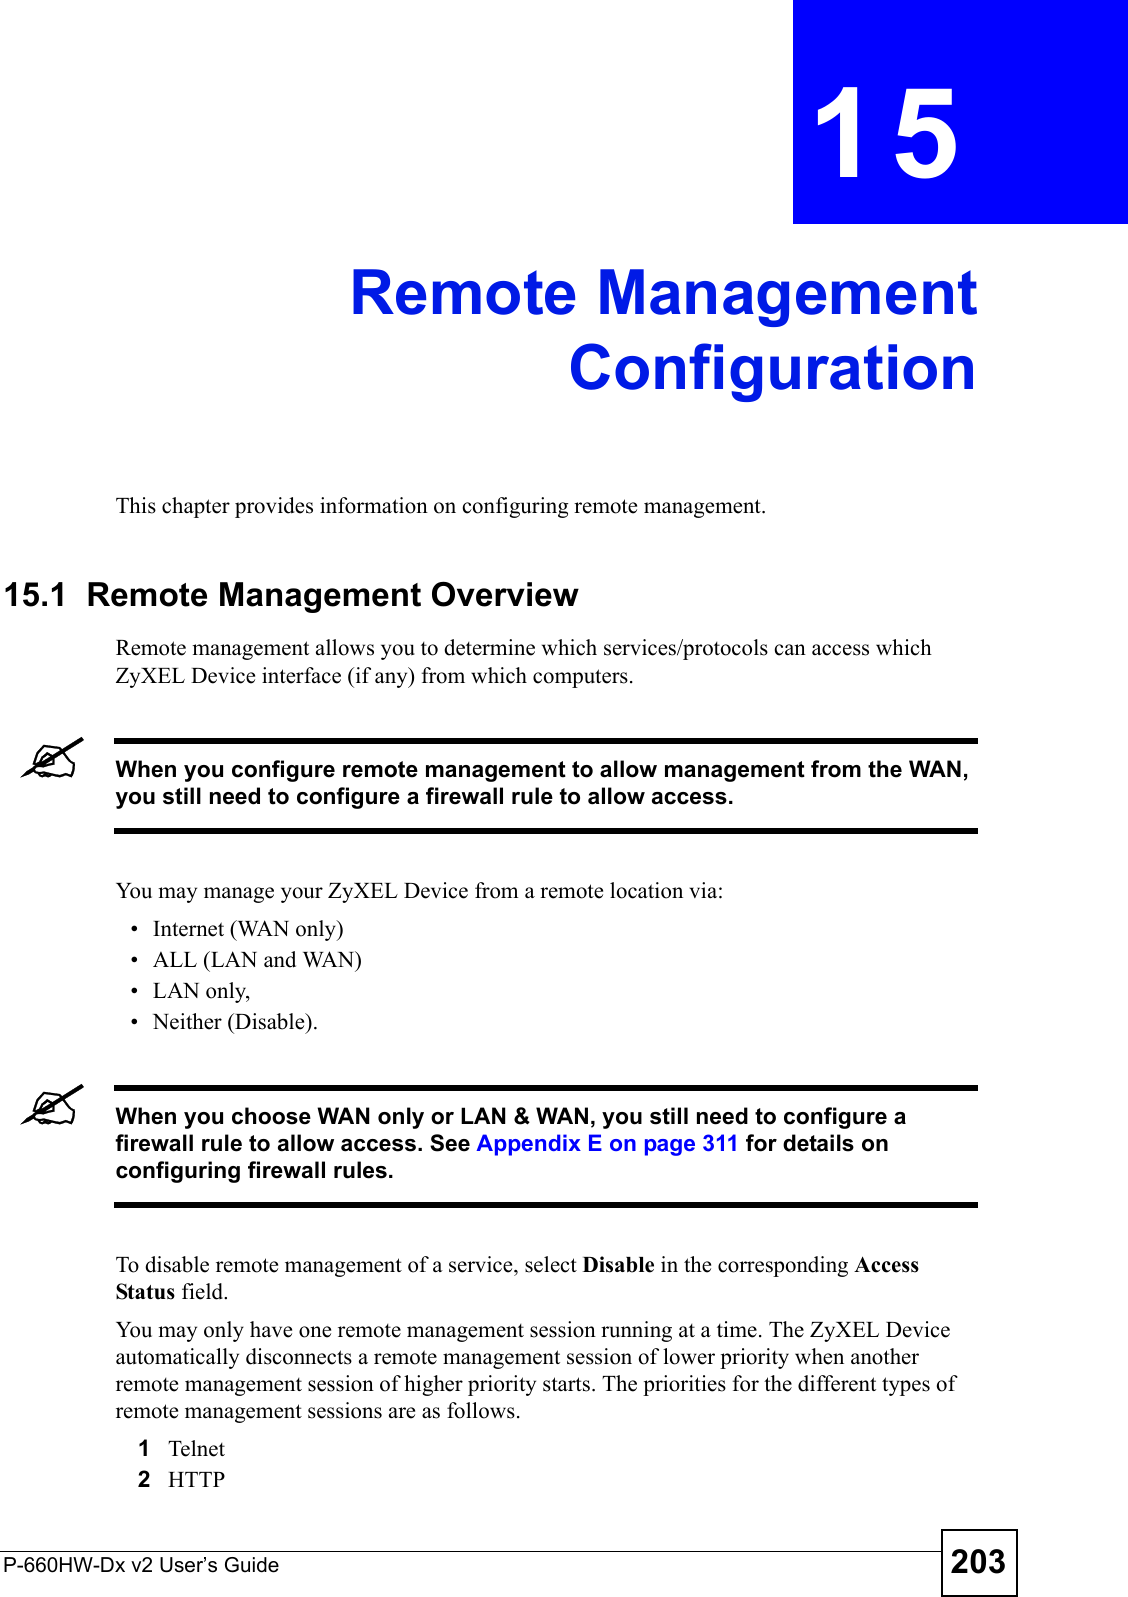 P-660HW-Dx v2 User’s Guide 203CHAPTER  15 Remote ManagementConfigurationThis chapter provides information on configuring remote management.15.1  Remote Management Overview Remote management allows you to determine which services/protocols can access which ZyXEL Device interface (if any) from which computers.&quot;When you configure remote management to allow management from the WAN, you still need to configure a firewall rule to allow access.You may manage your ZyXEL Device from a remote location via:• Internet (WAN only)• ALL (LAN and WAN)• LAN only, • Neither (Disable).&quot;When you choose WAN only or LAN &amp; WAN, you still need to configure a firewall rule to allow access. See Appendix E on page 311 for details on configuring firewall rules.To disable remote management of a service, select Disable in the corresponding Access Status field.You may only have one remote management session running at a time. The ZyXEL Device automatically disconnects a remote management session of lower priority when another remote management session of higher priority starts. The priorities for the different types of remote management sessions are as follows.1Telnet2HTTP